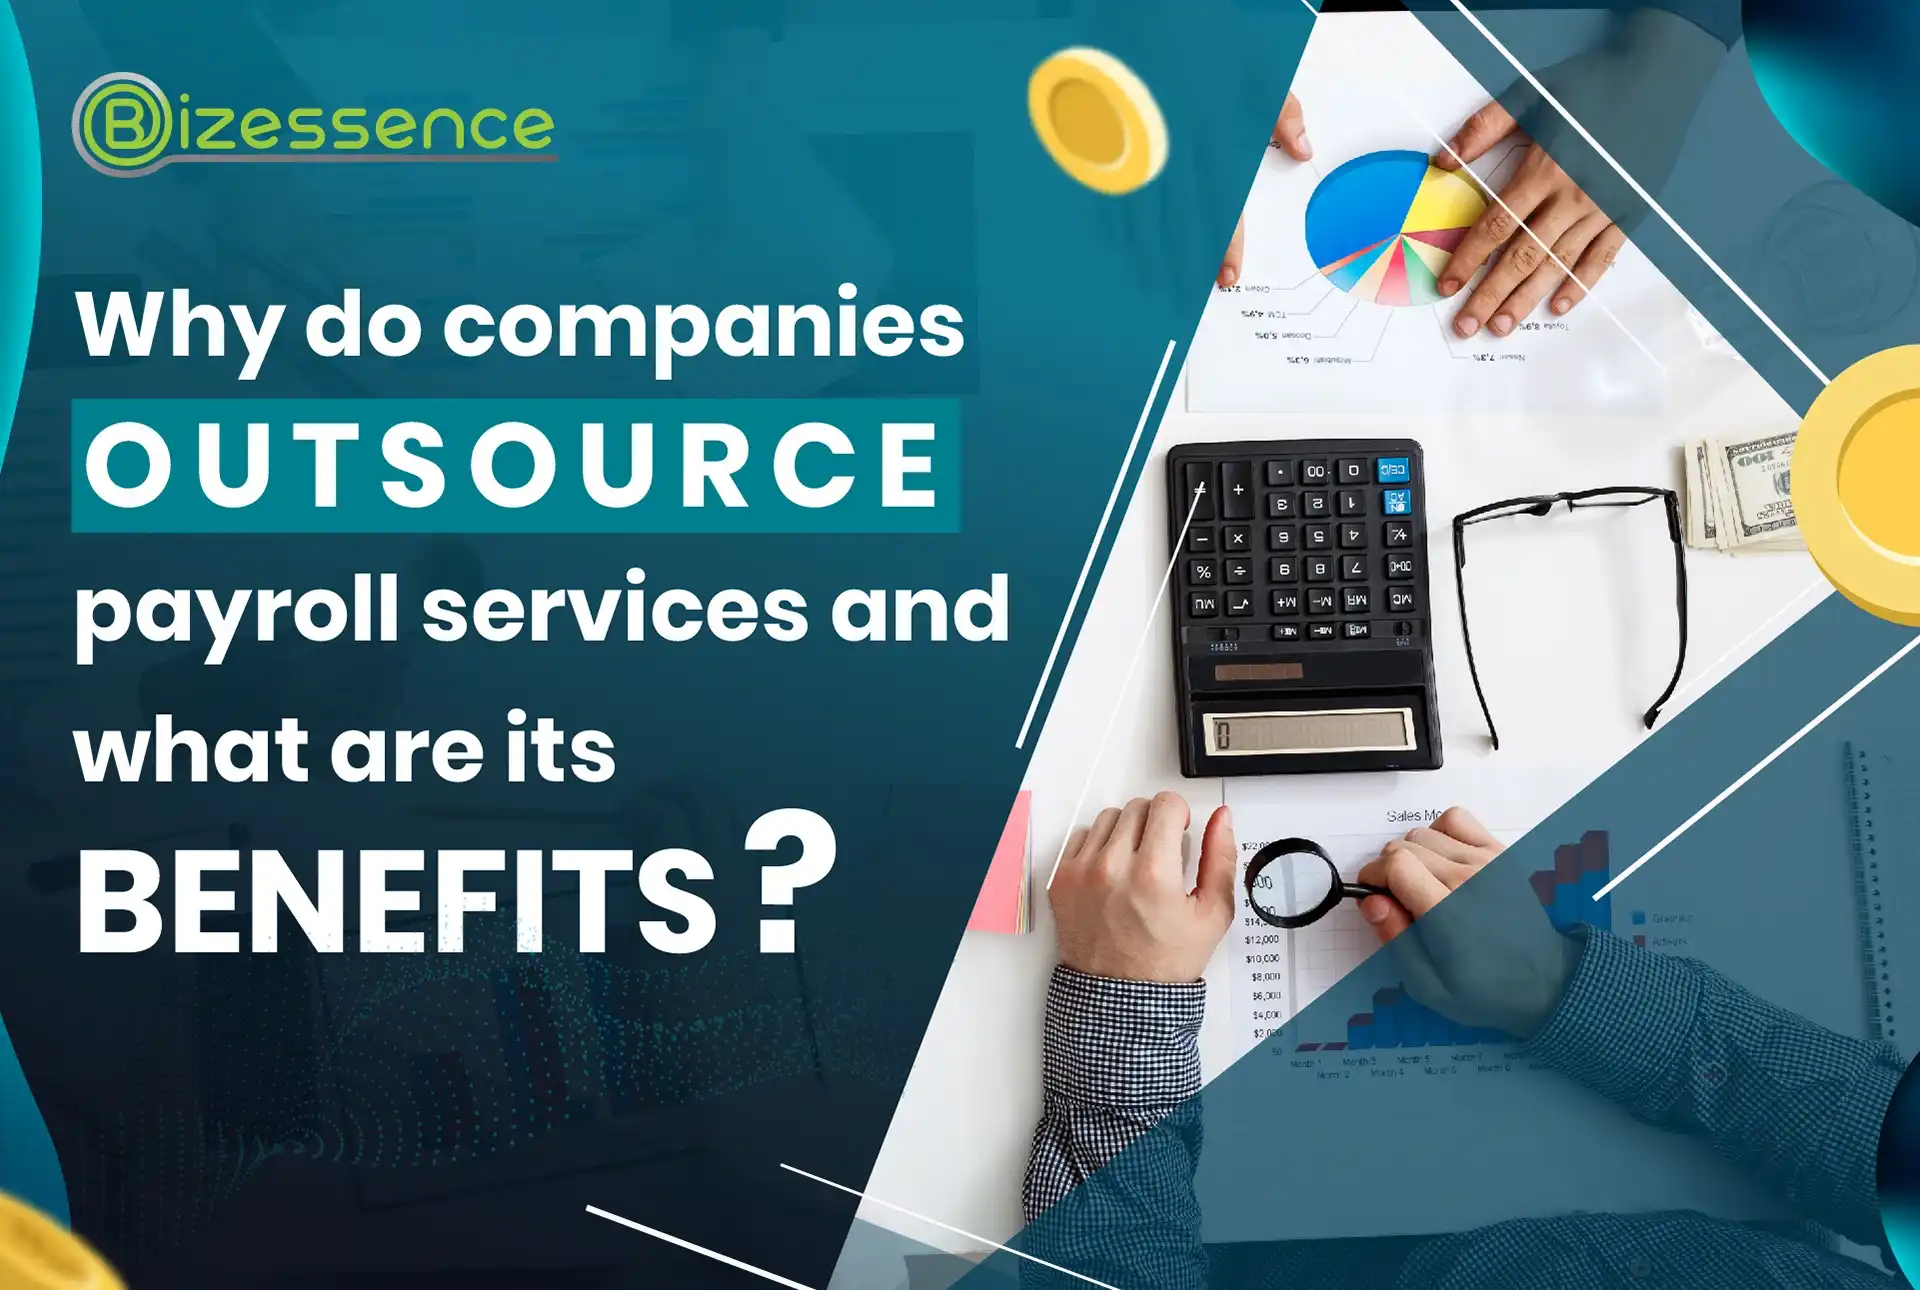 Why do companies outsource payroll services, and what are its benefits?